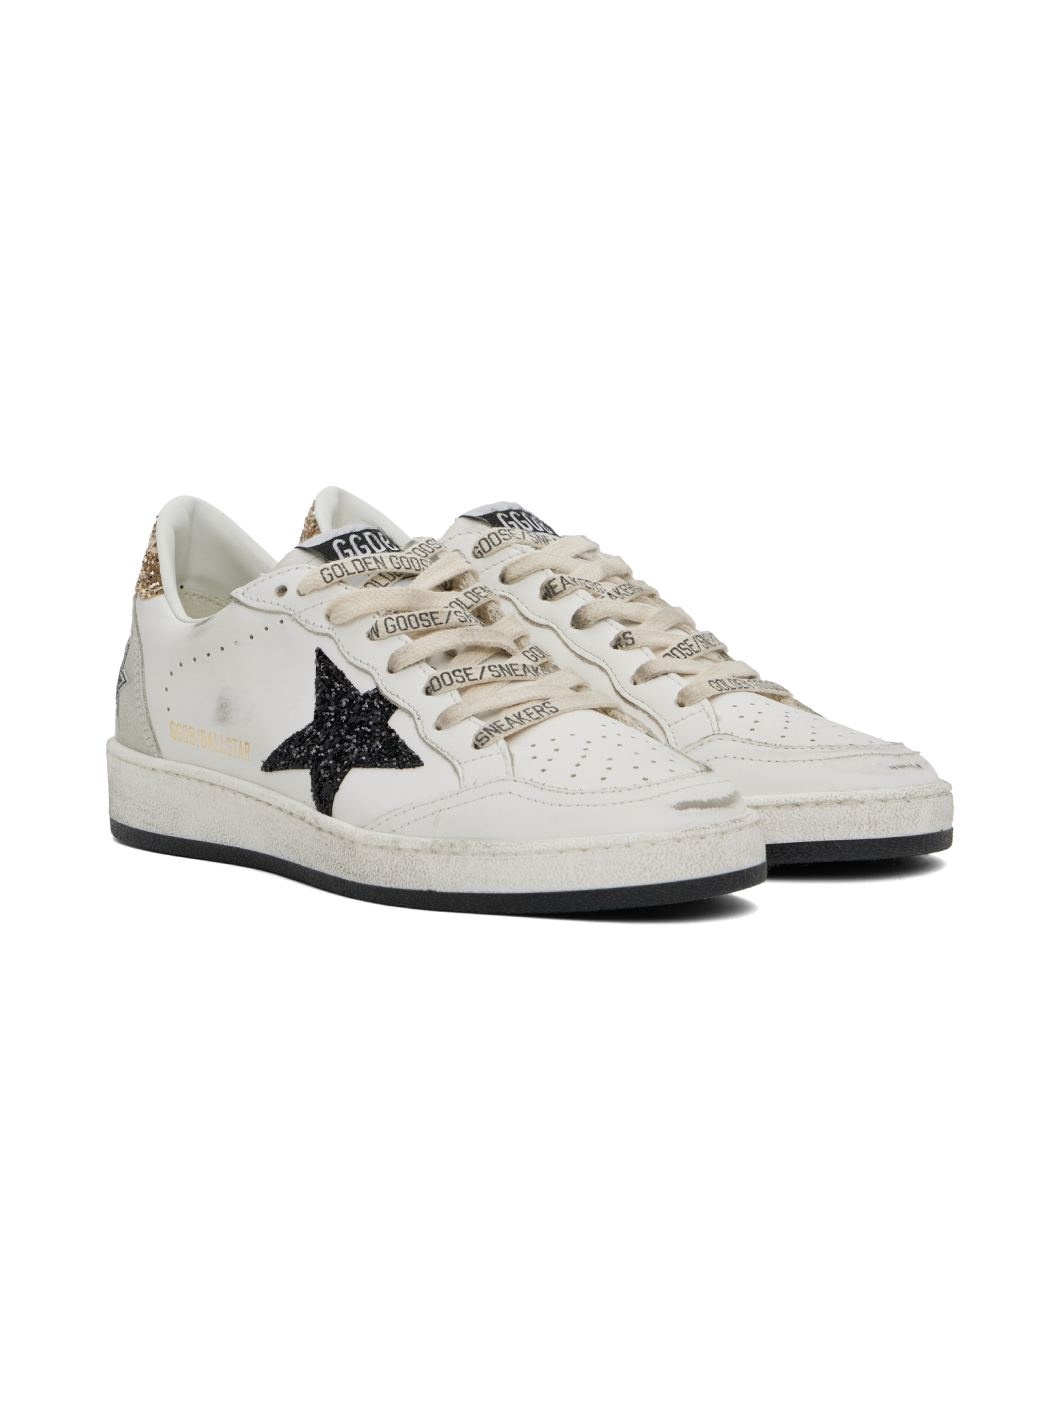 Off-White Ball Star Sneakers - 4